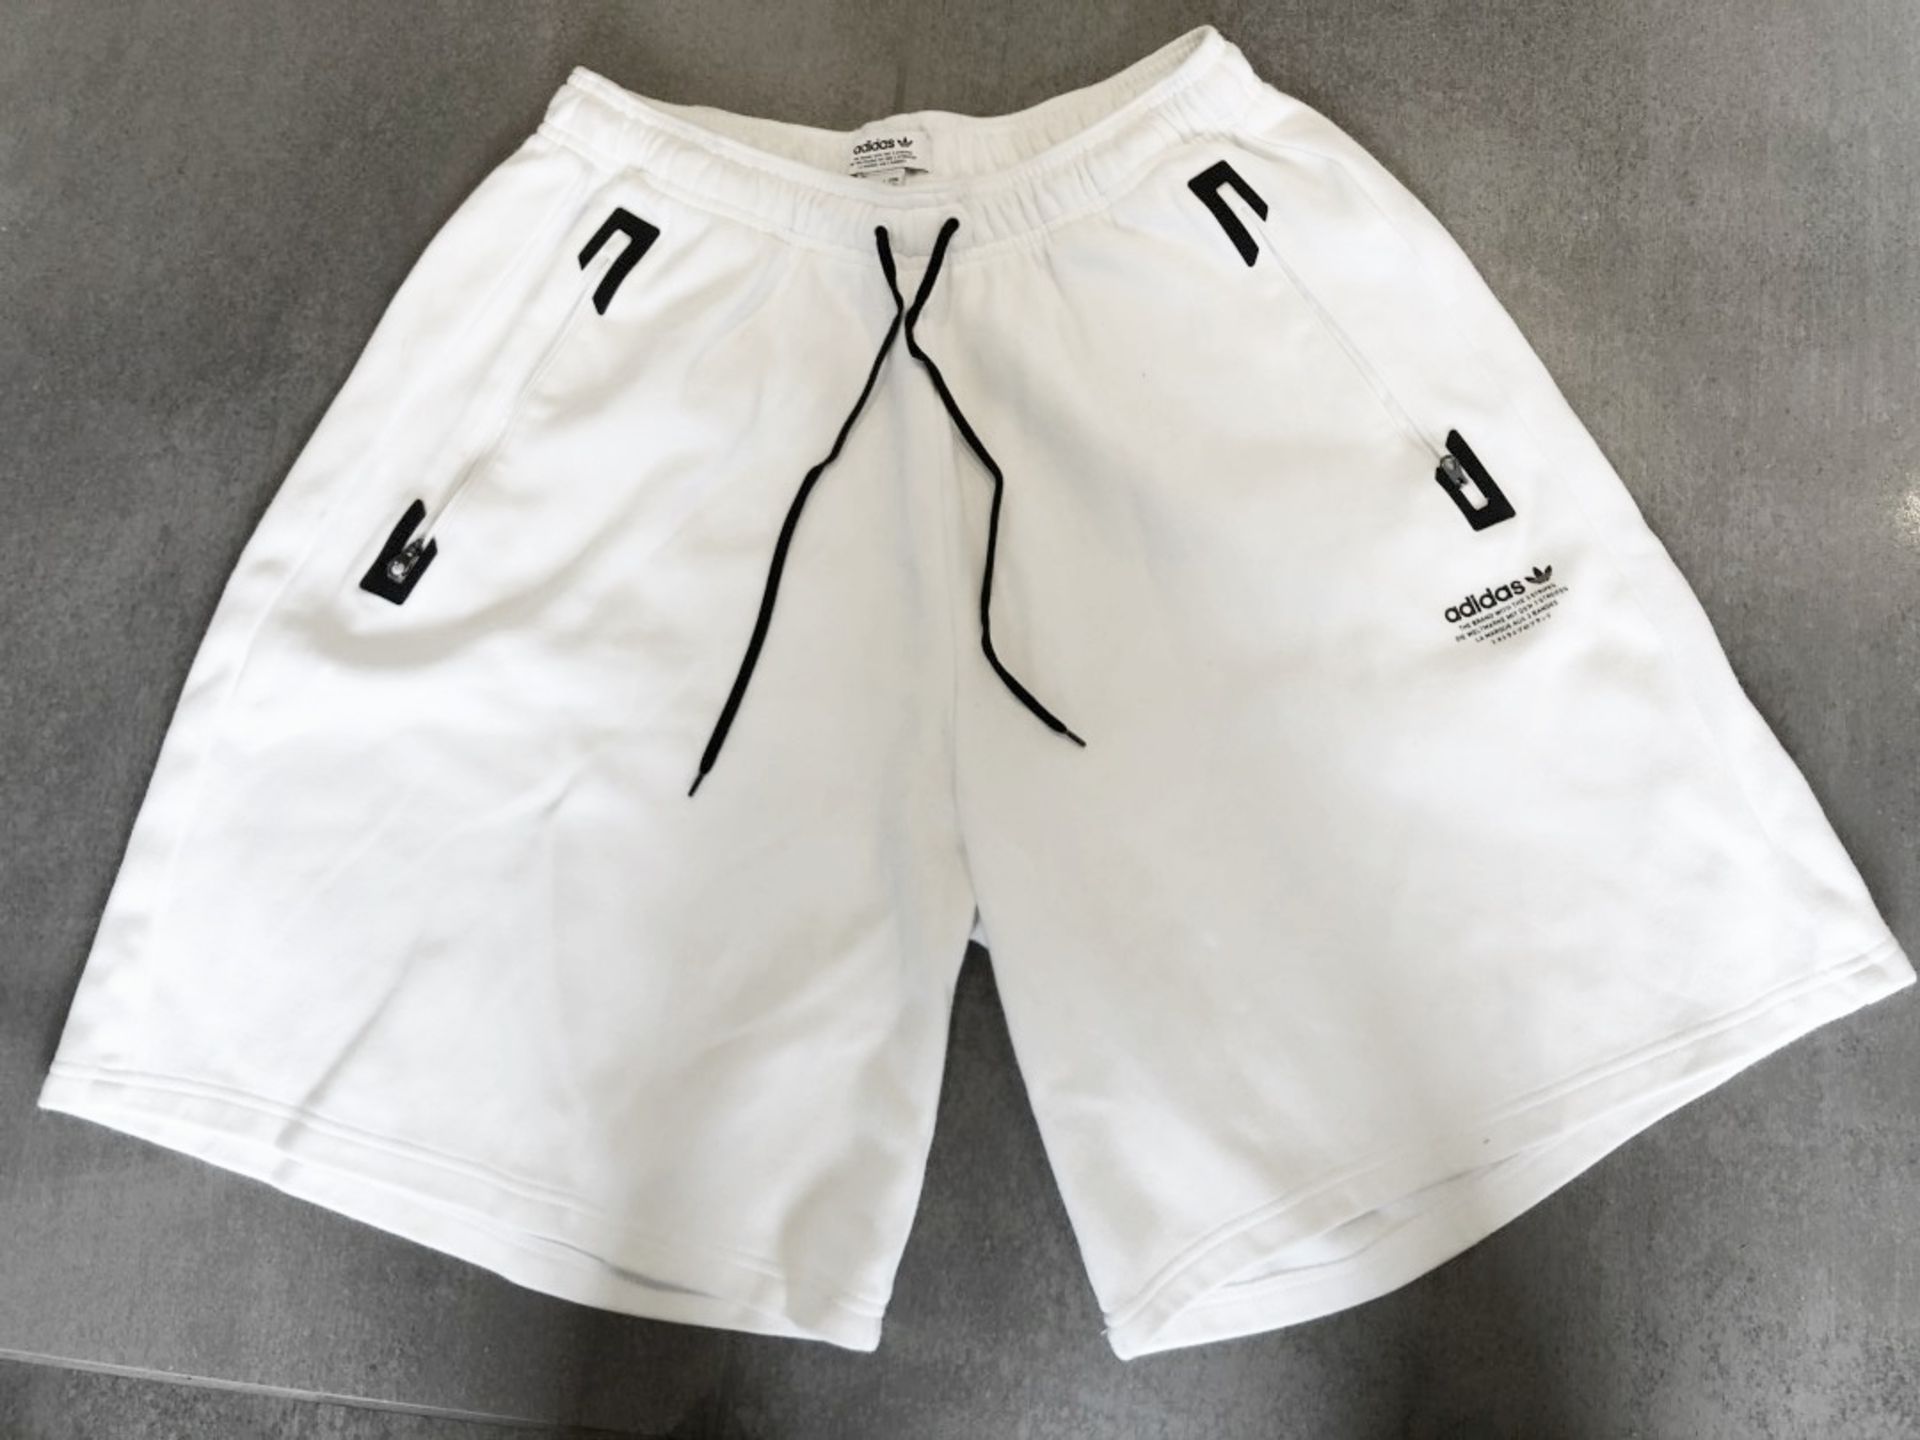 1 x Pair Of Men's Genuine Adidas Shorts In White - Size (EU/UK): L/L - Preowned - Ref: JS126 - NO - Image 9 of 9